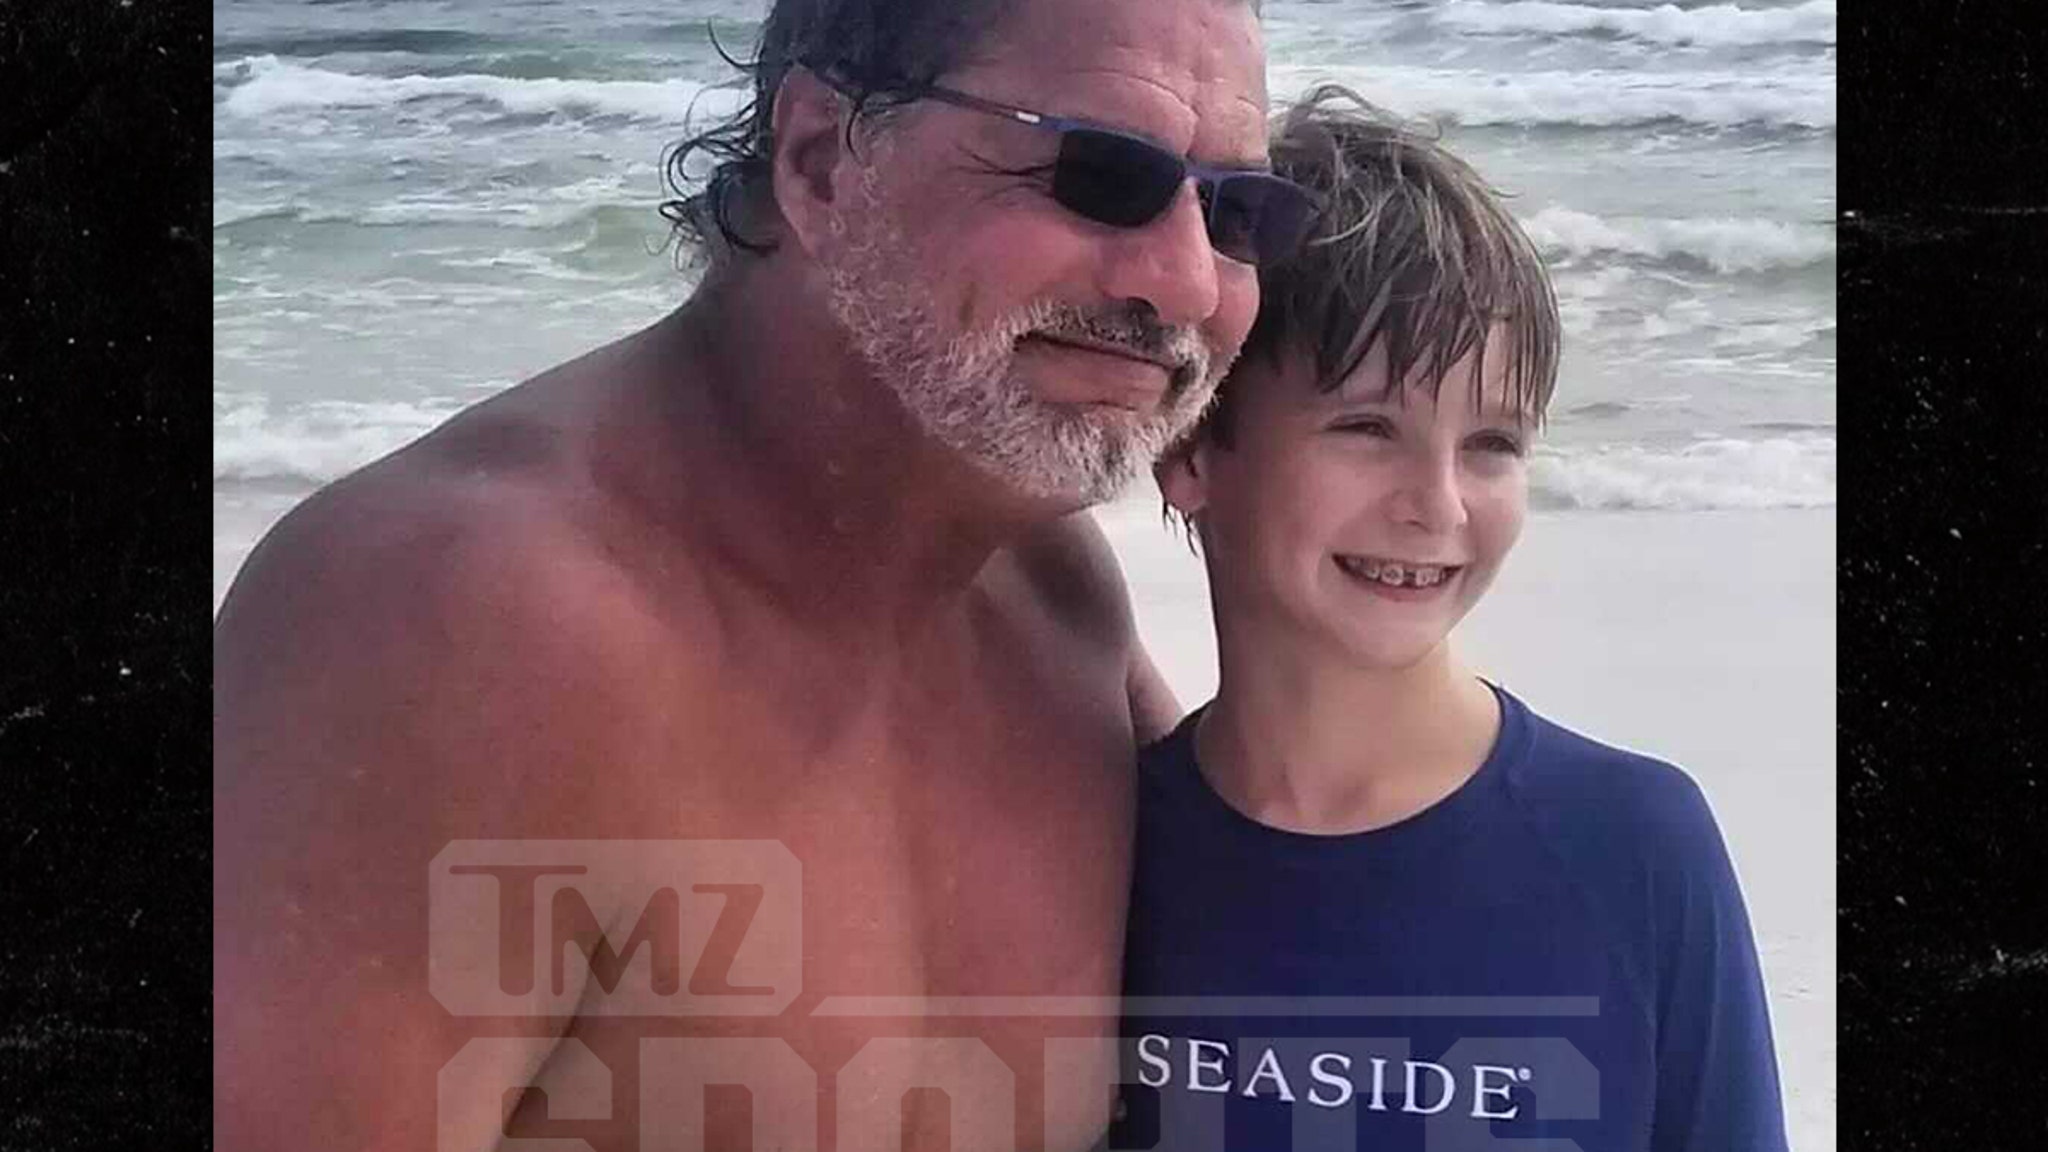 Ex-WWE Star Al Snow Heroically Saves Child From Ocean Riptide